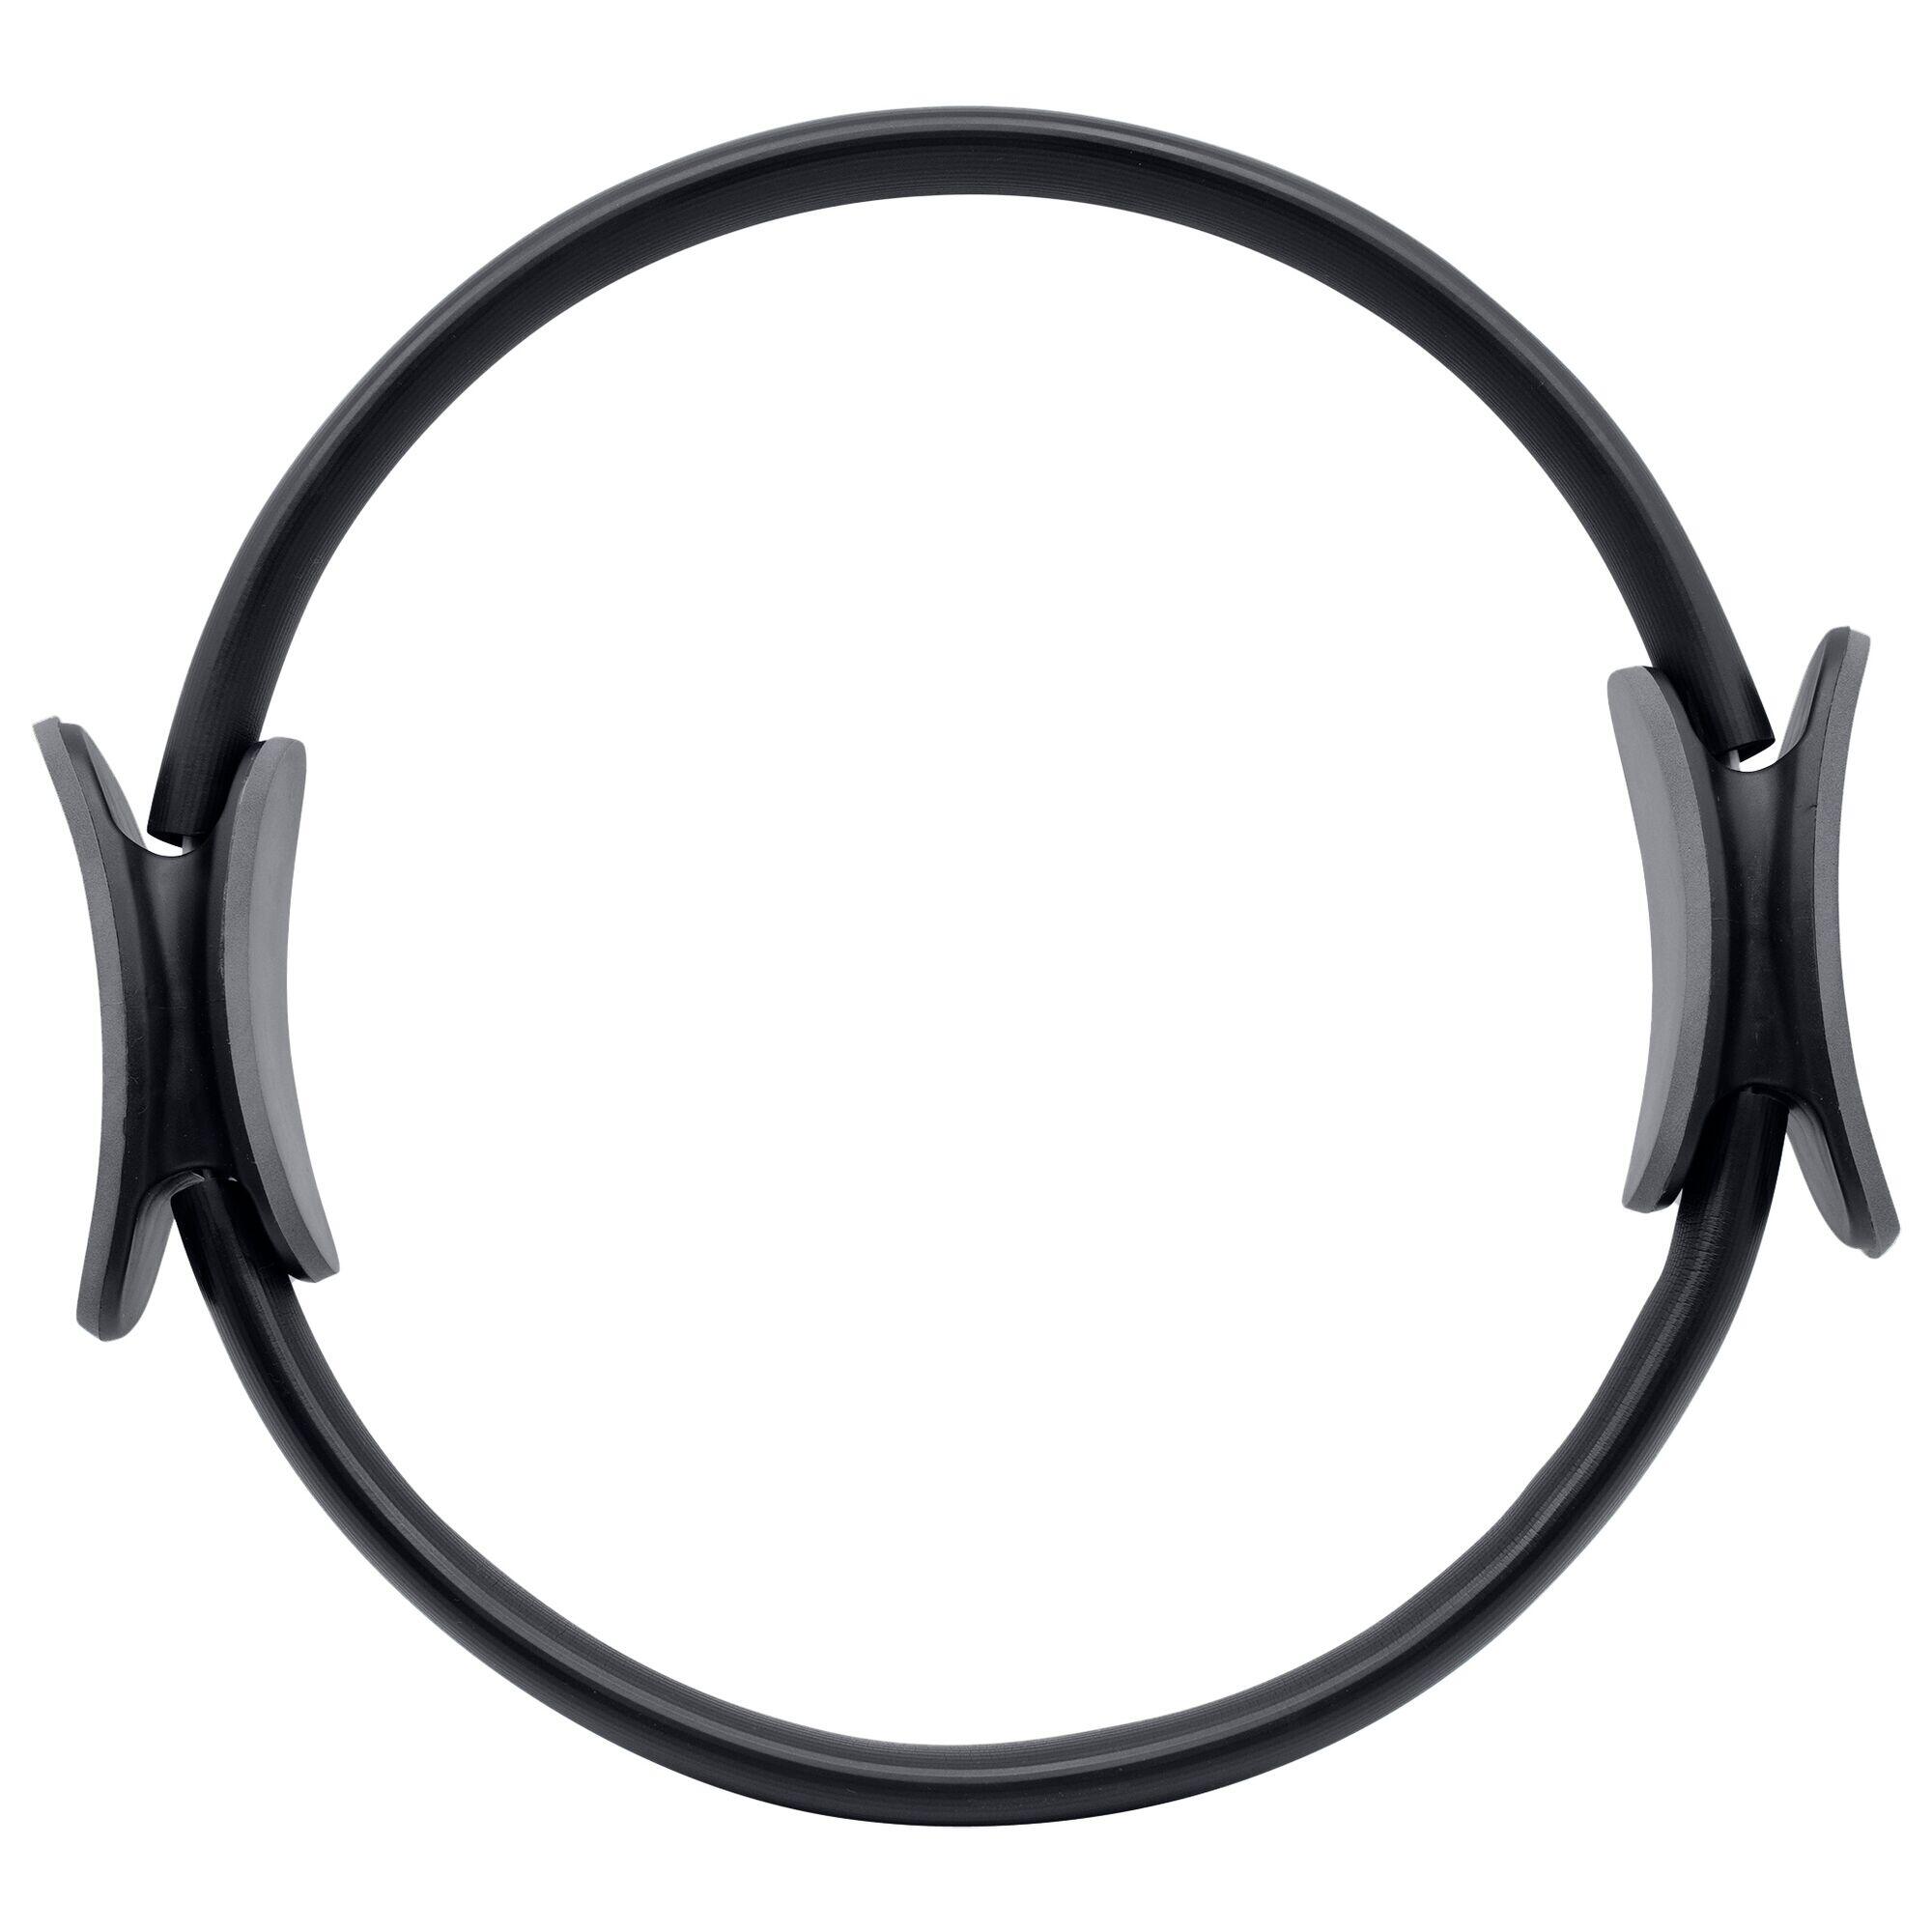 DARE 2B Adults' Home Fitness Pilates Ring - Black